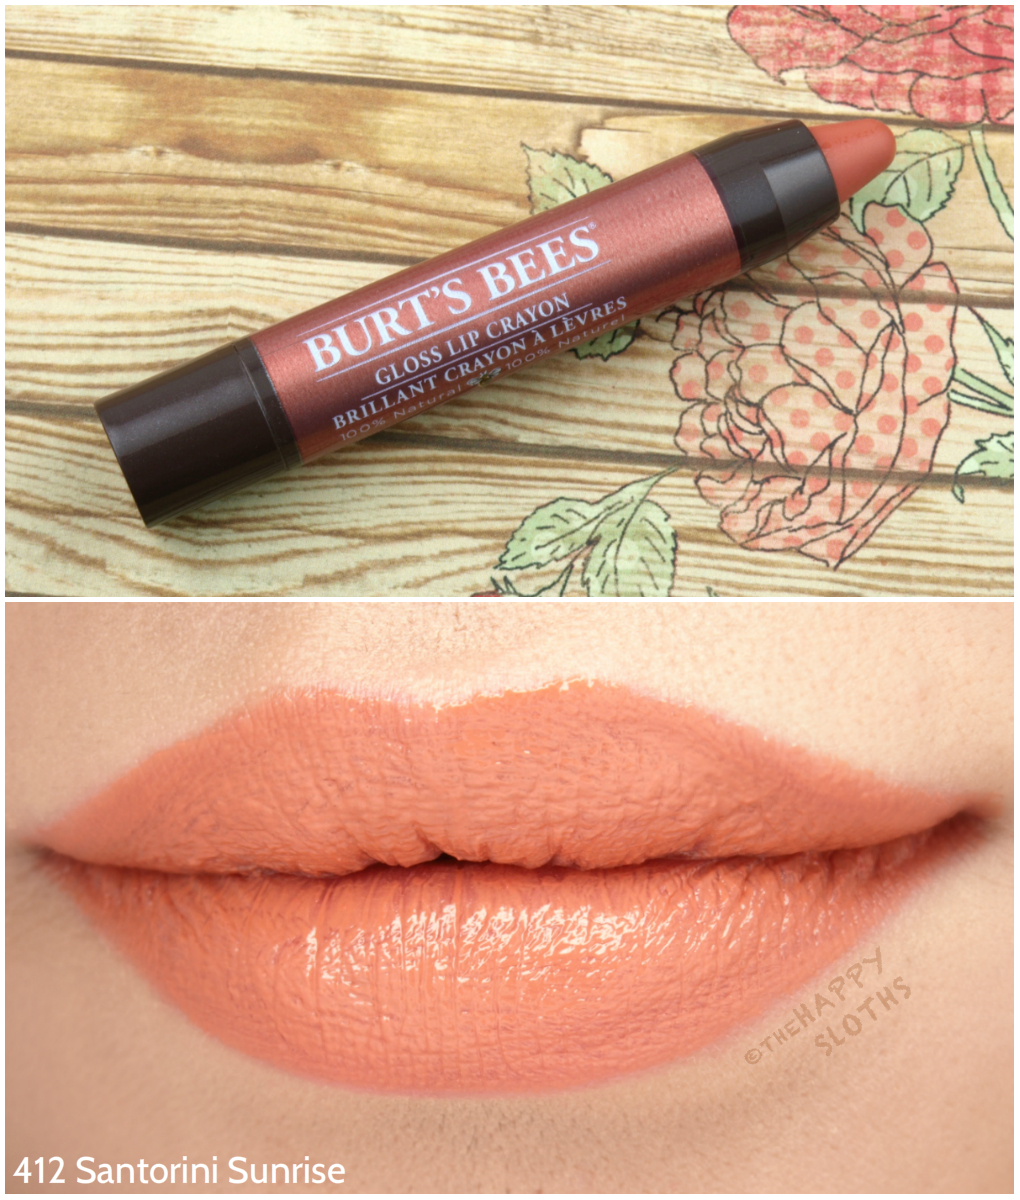 Burt's Bees Gloss Lip Crayon in 412 Santorini Sunrise: Review and Swatches